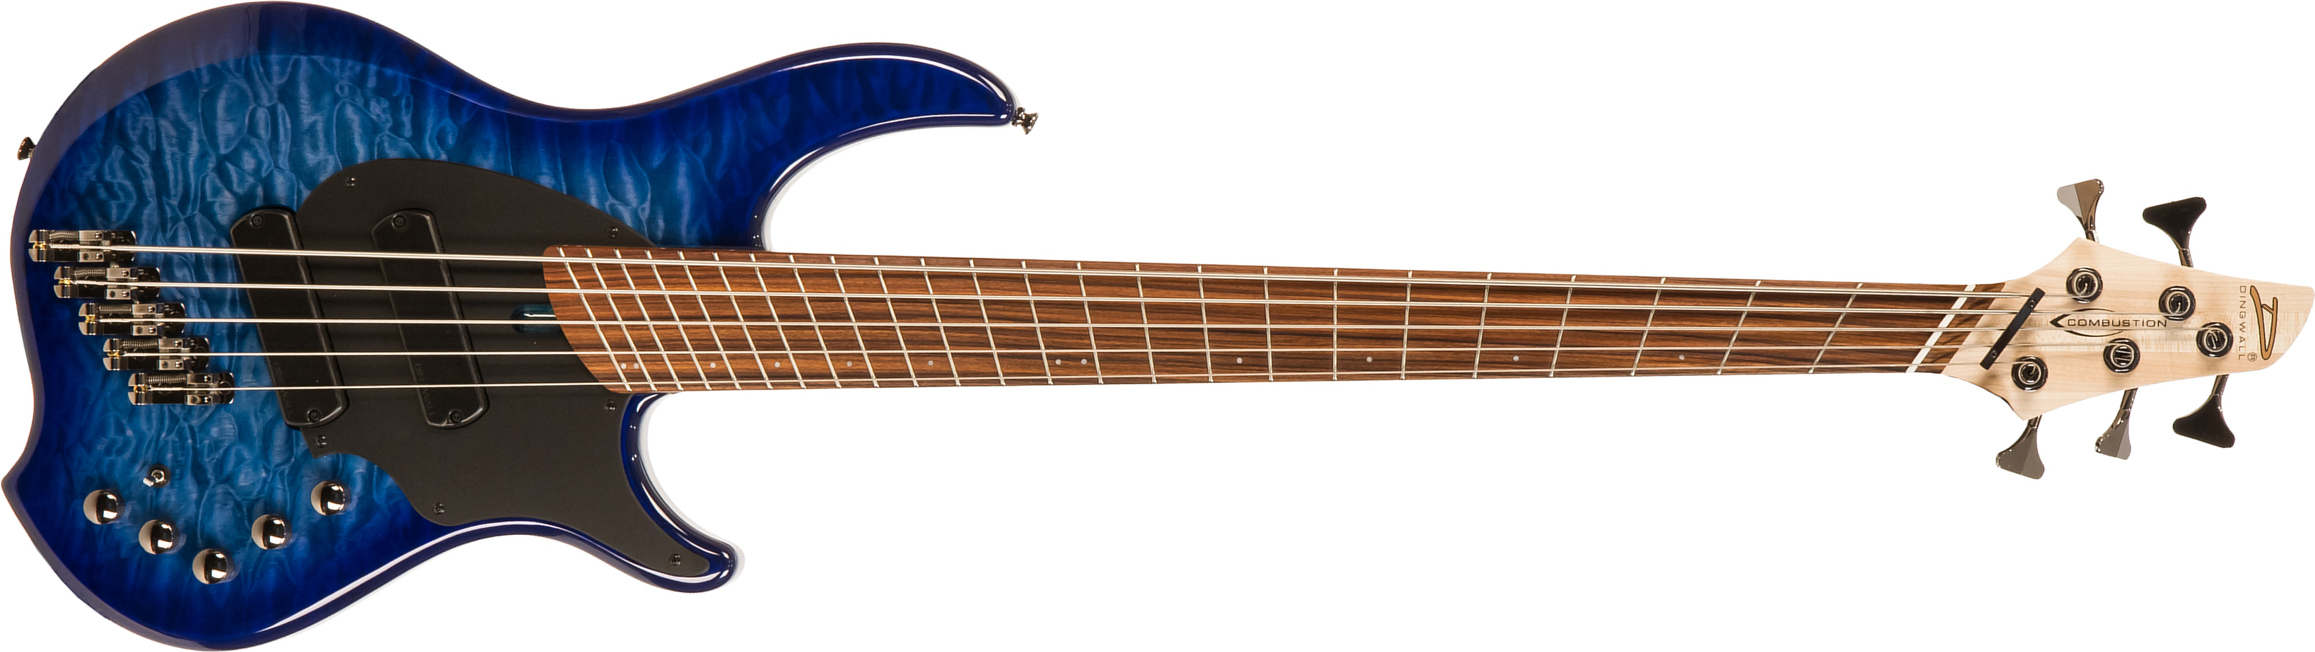 Dingwall Combustion Cb2 5c 2pu Active Pf - Indigo Burst - Solid body electric bass - Main picture